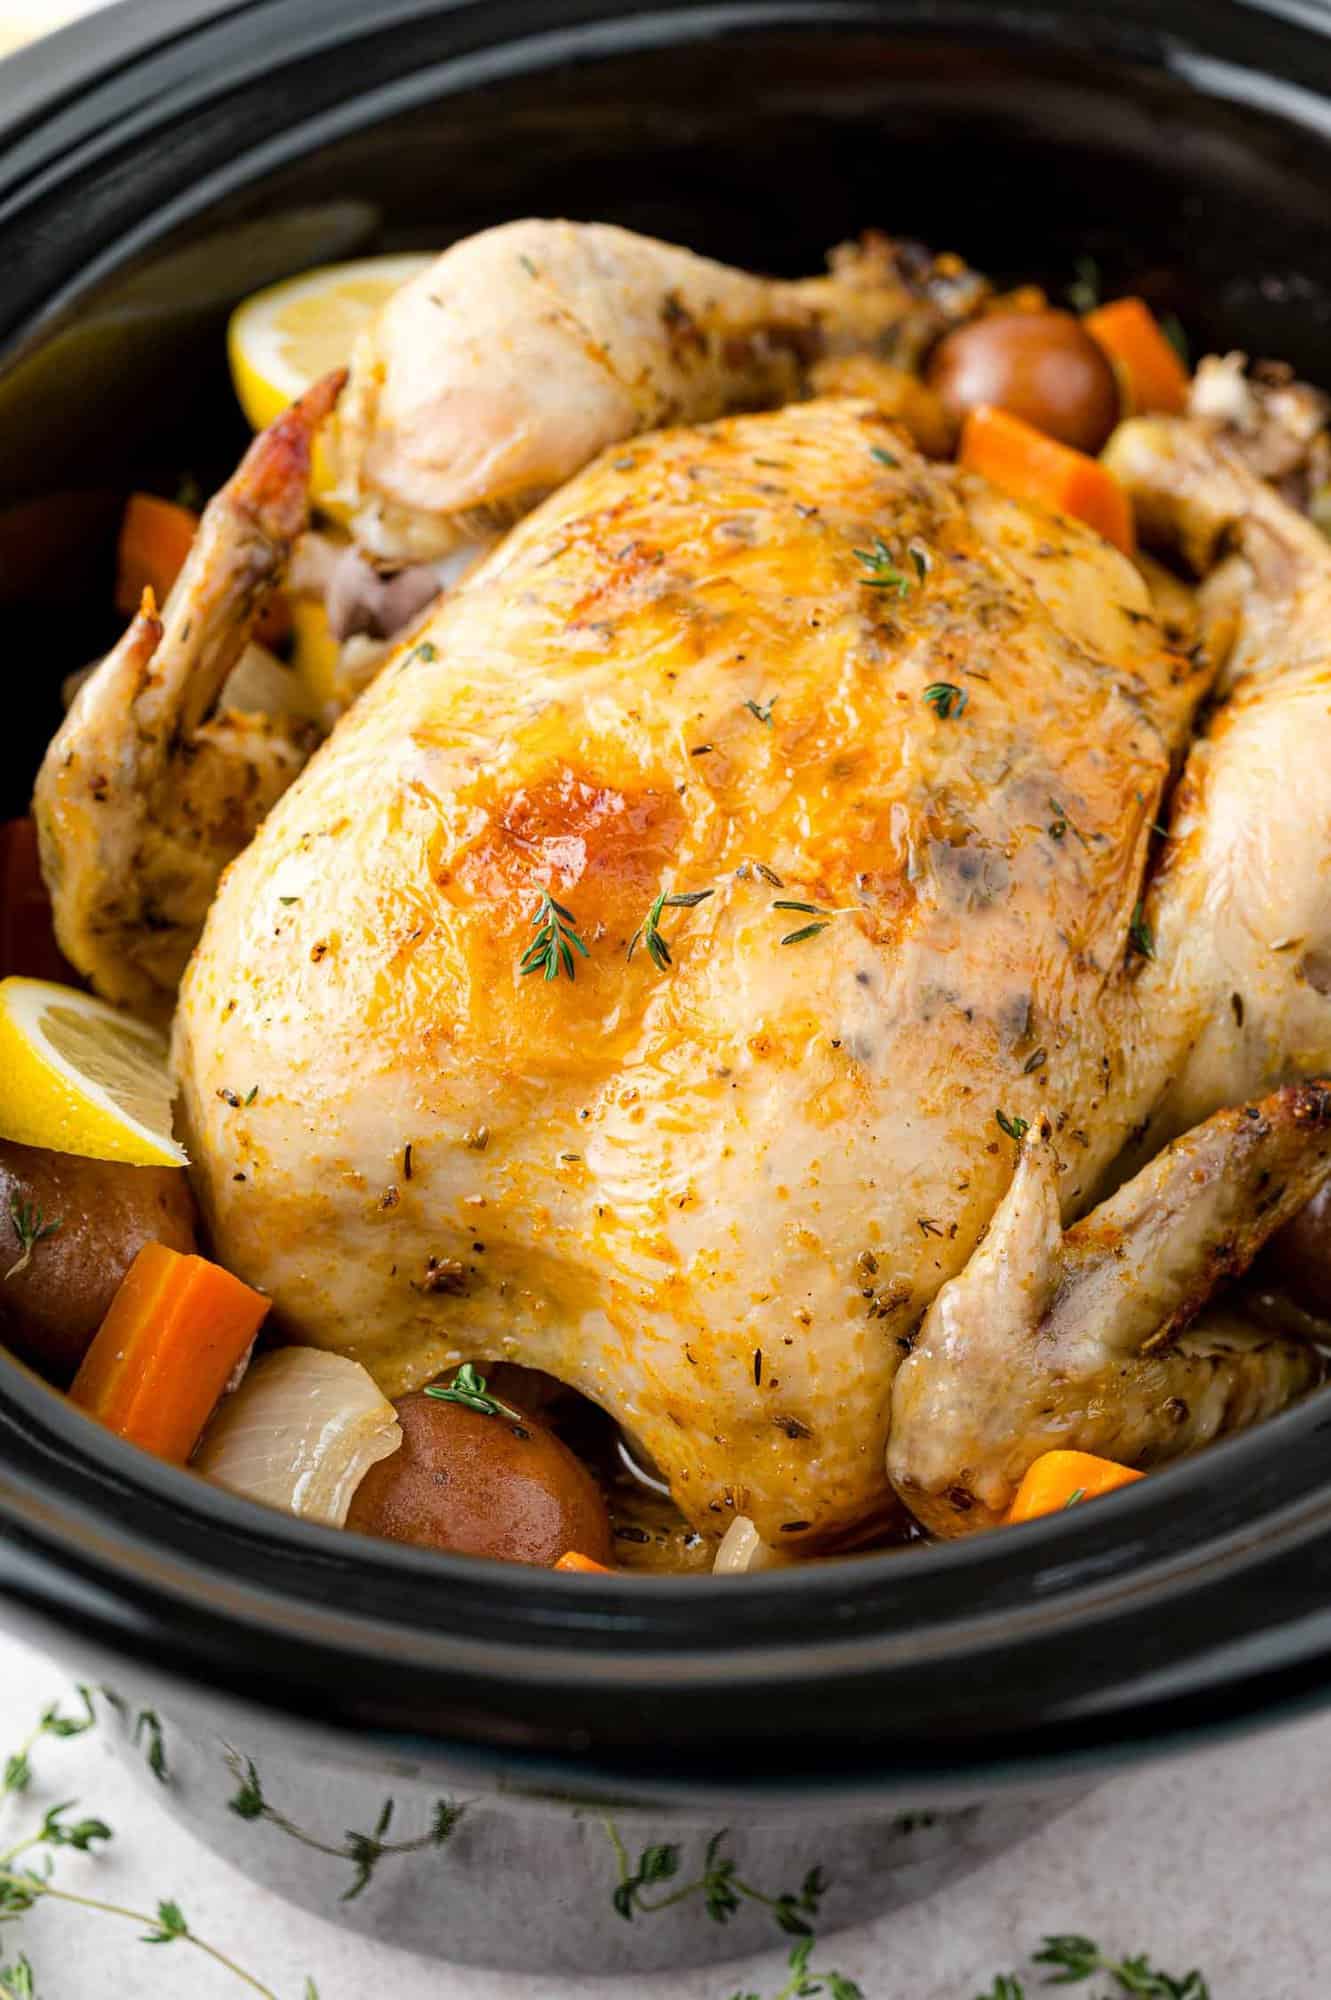 Whole chicken, pictured in a crockpot with carrots and potatoes.